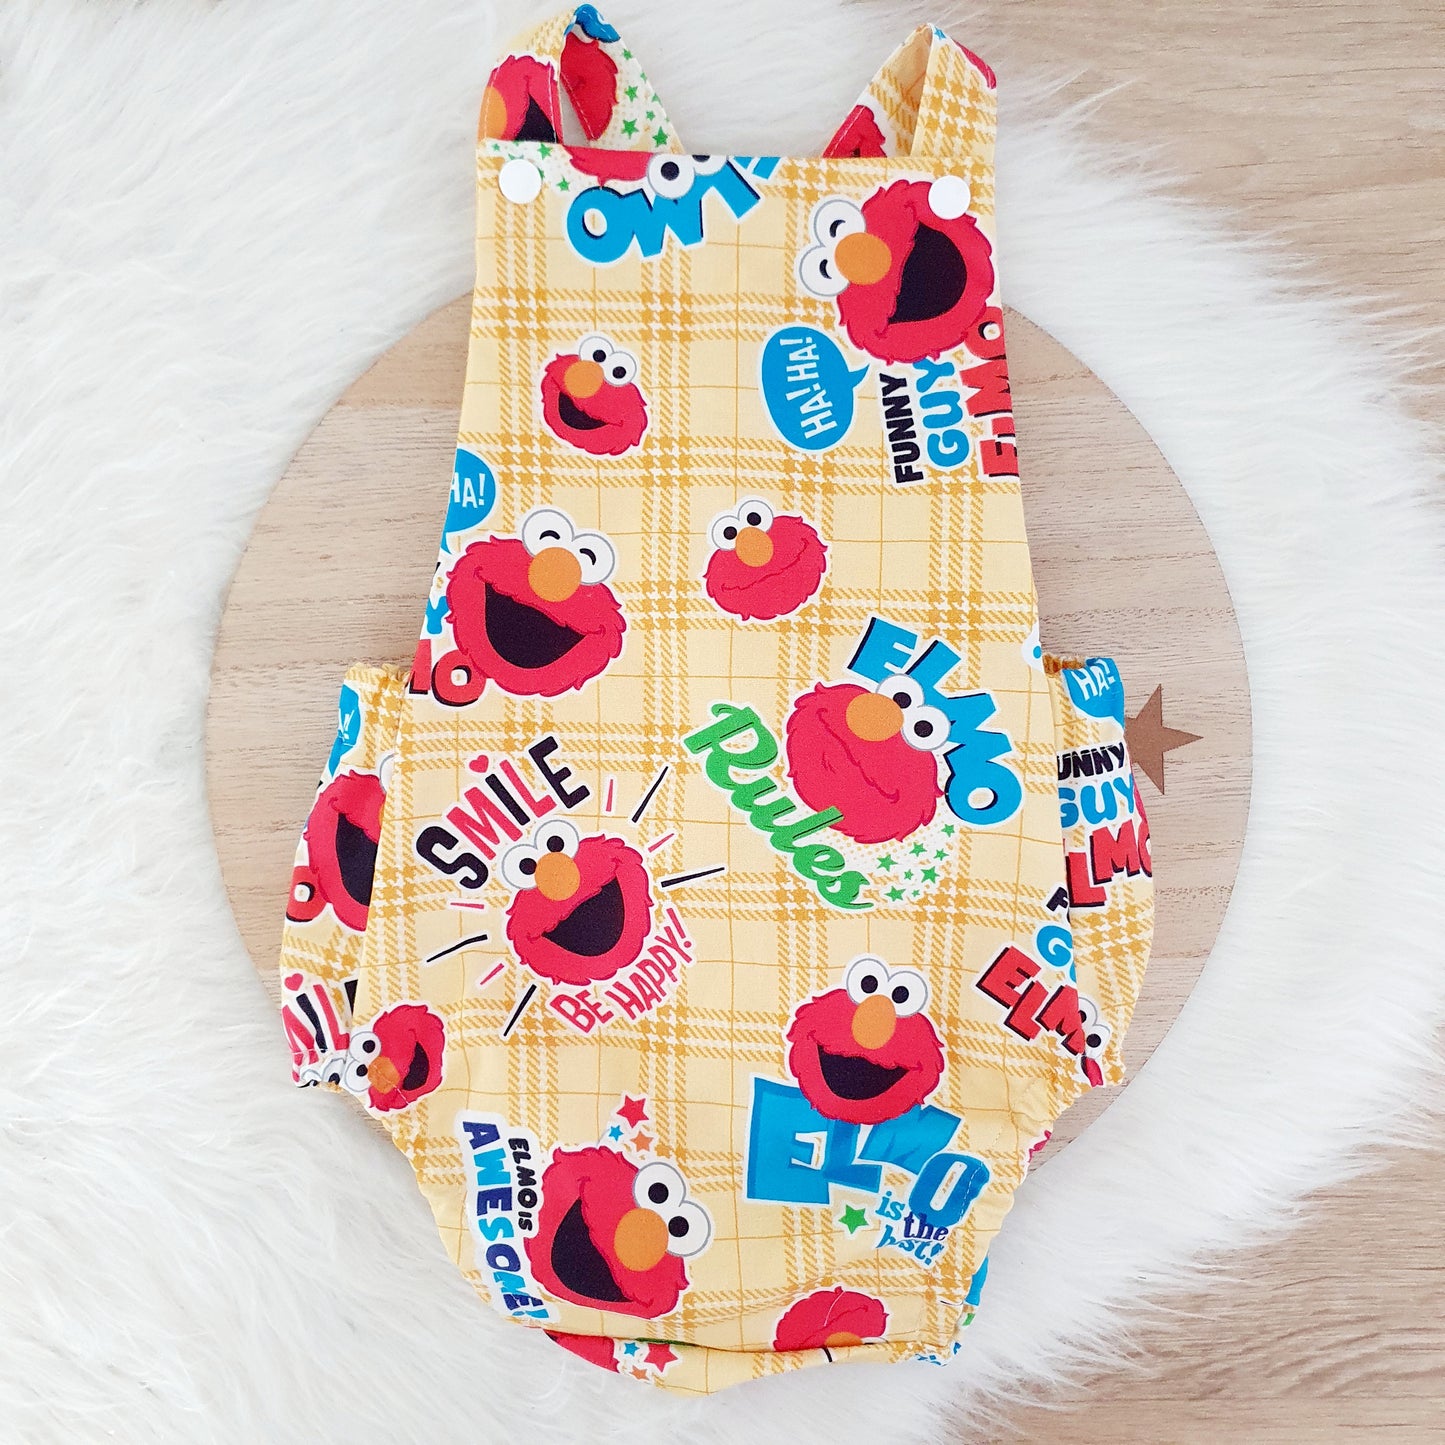 ELMO print Baby Romper, Handmade Baby Clothing, Size 1 - 1st Birthday Clothing / Cake Smash Outfit, 12 - 18 months